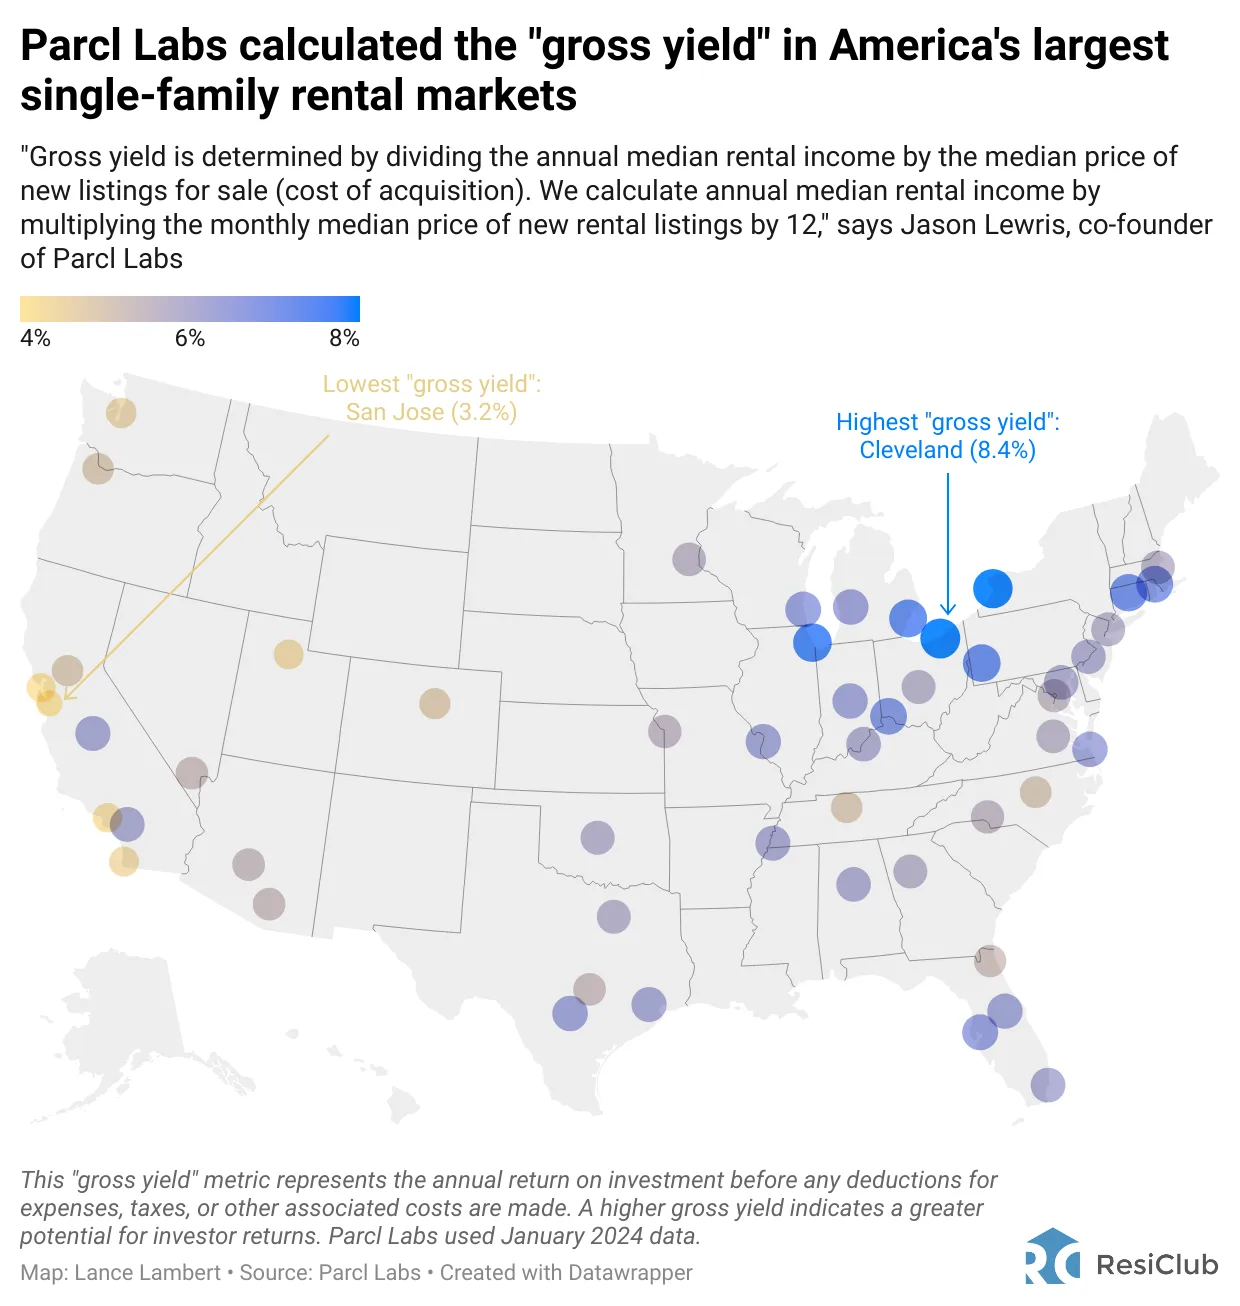 Map of America and cities with the highest and lowest gross rental yields